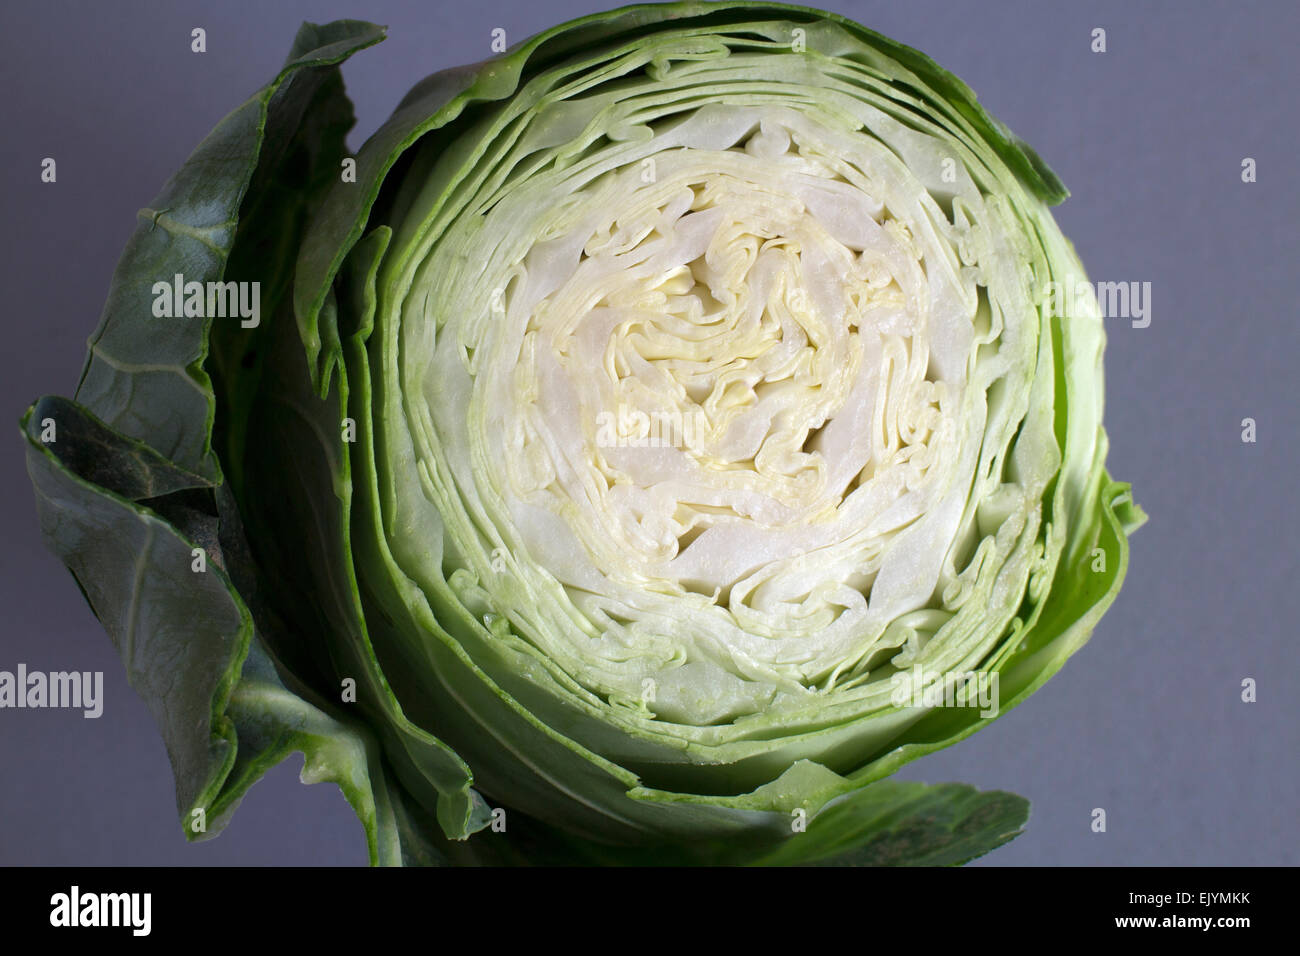 A Sweetheart cabbage, cross-section from top Stock Photo